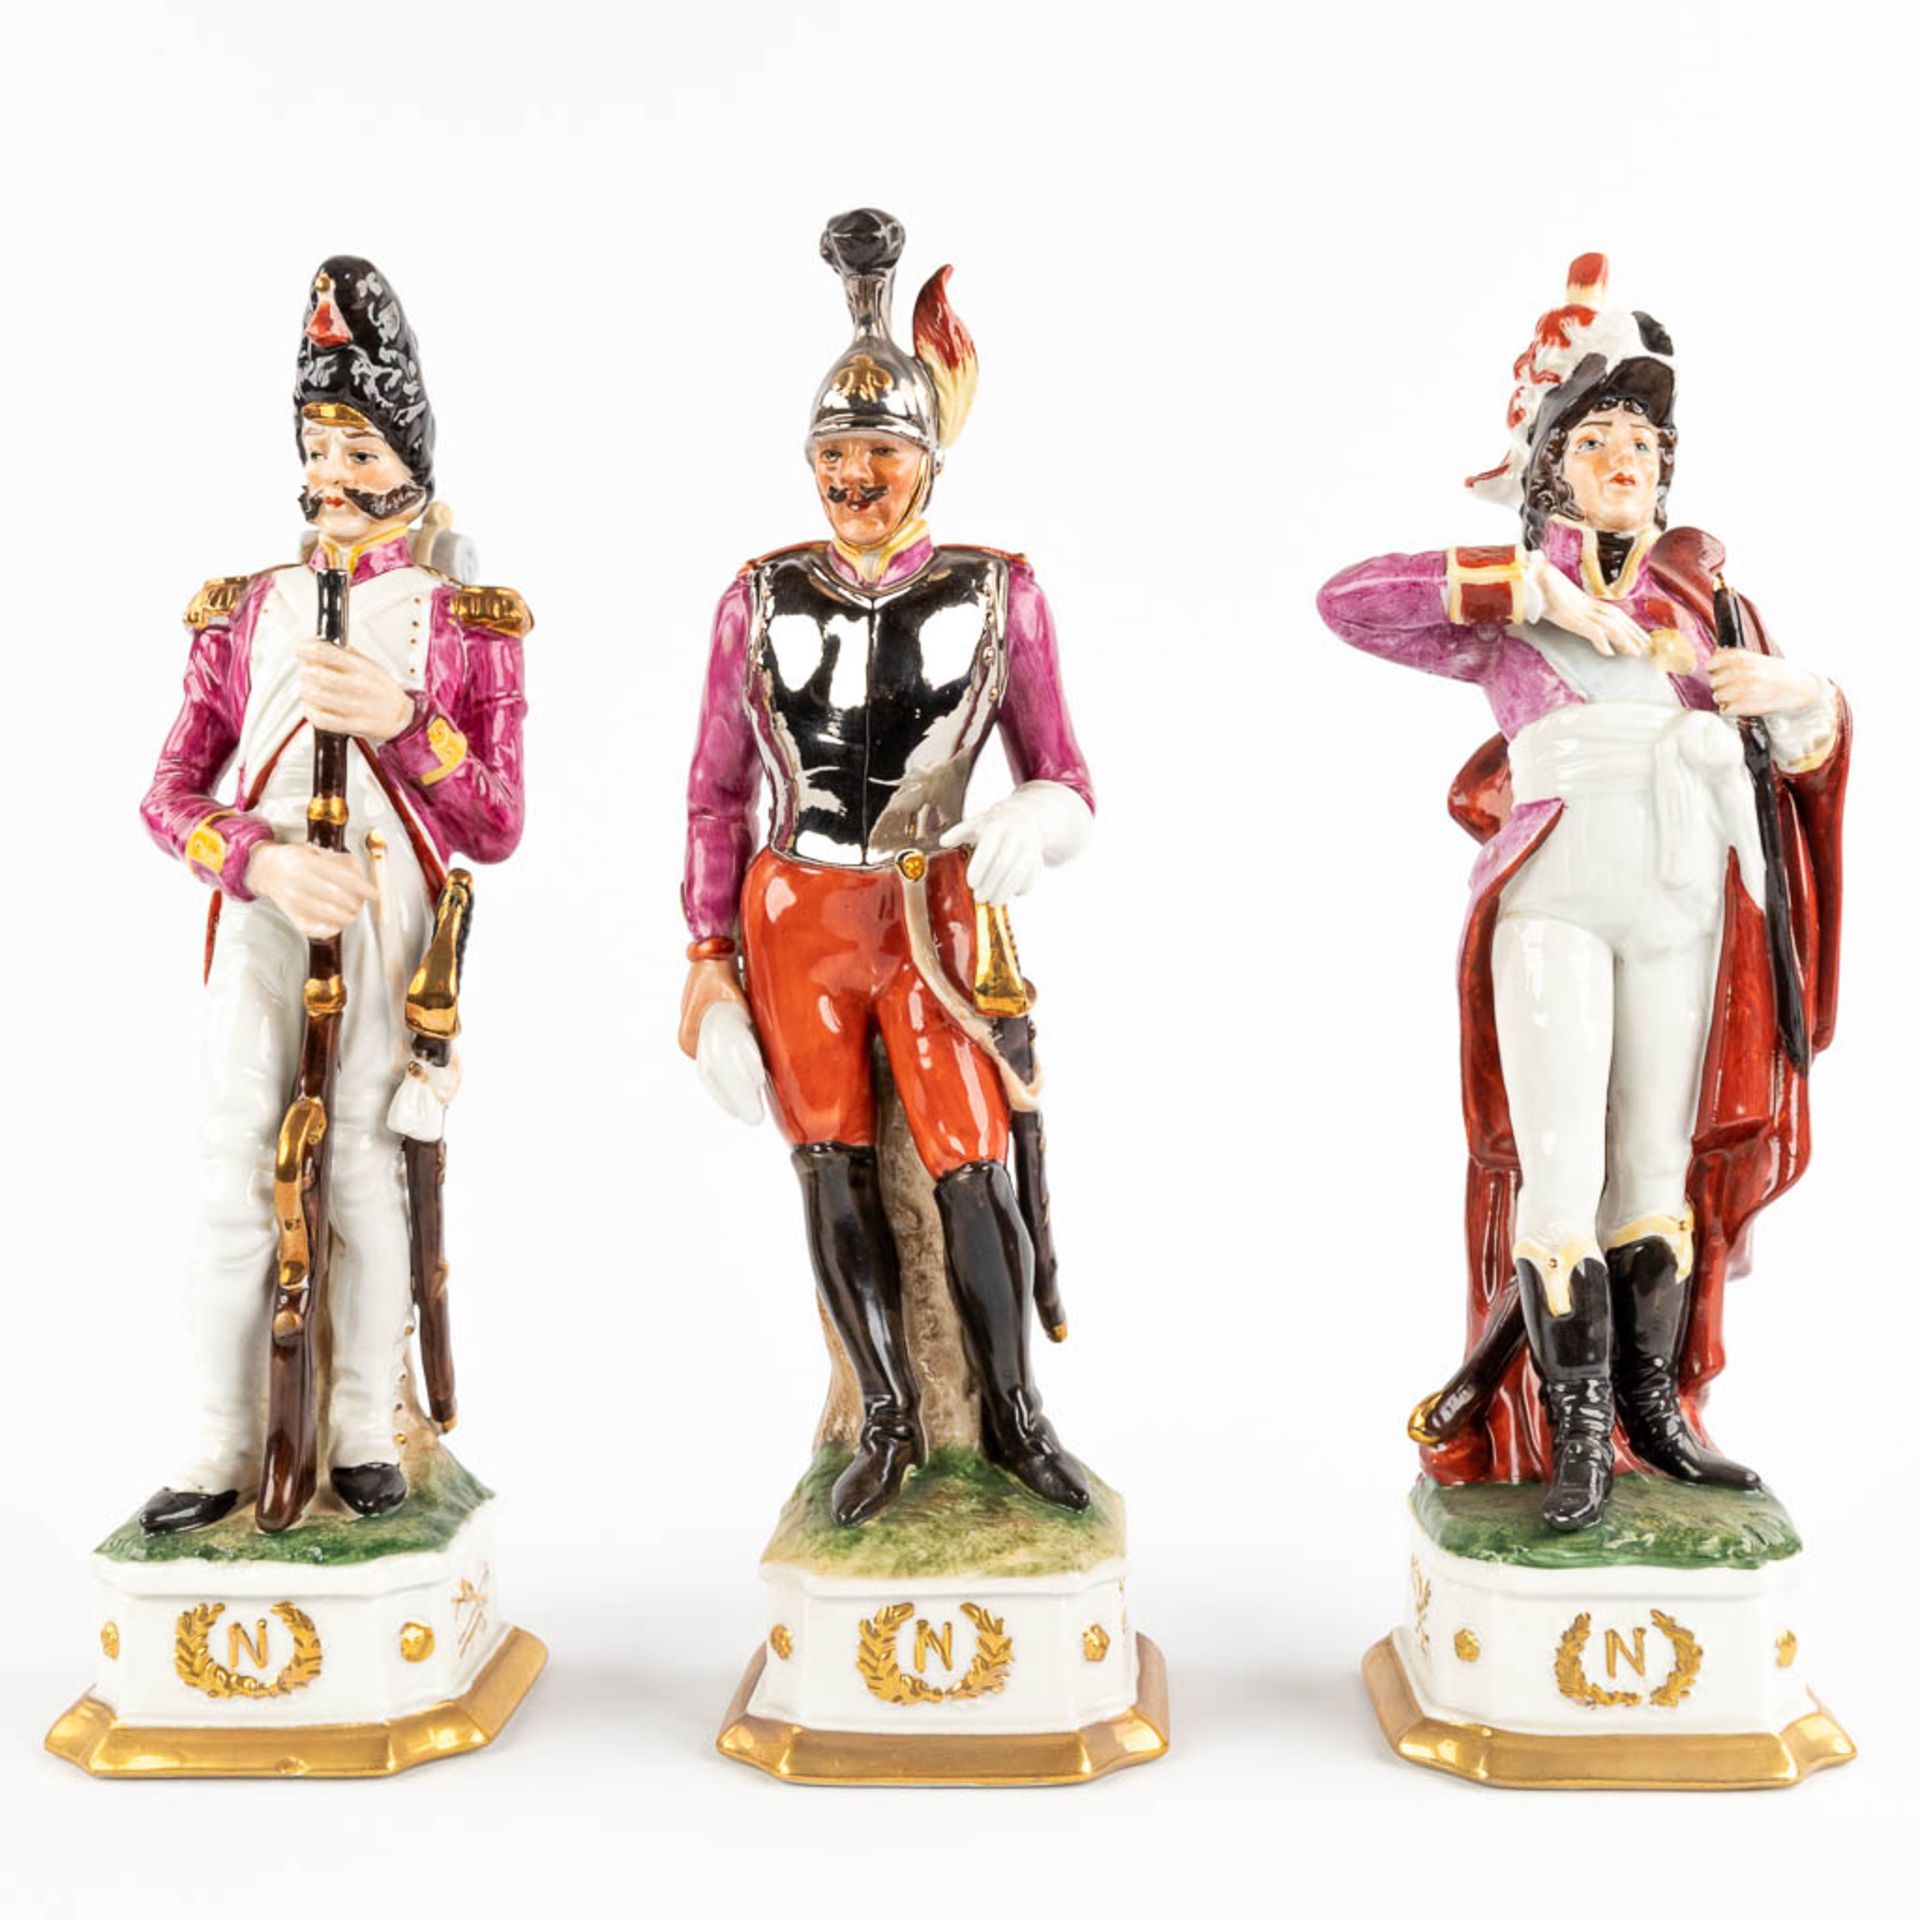 Napoleon and 9 generals, polychrome porcelain. 20th C. (H:32 cm) - Image 6 of 15